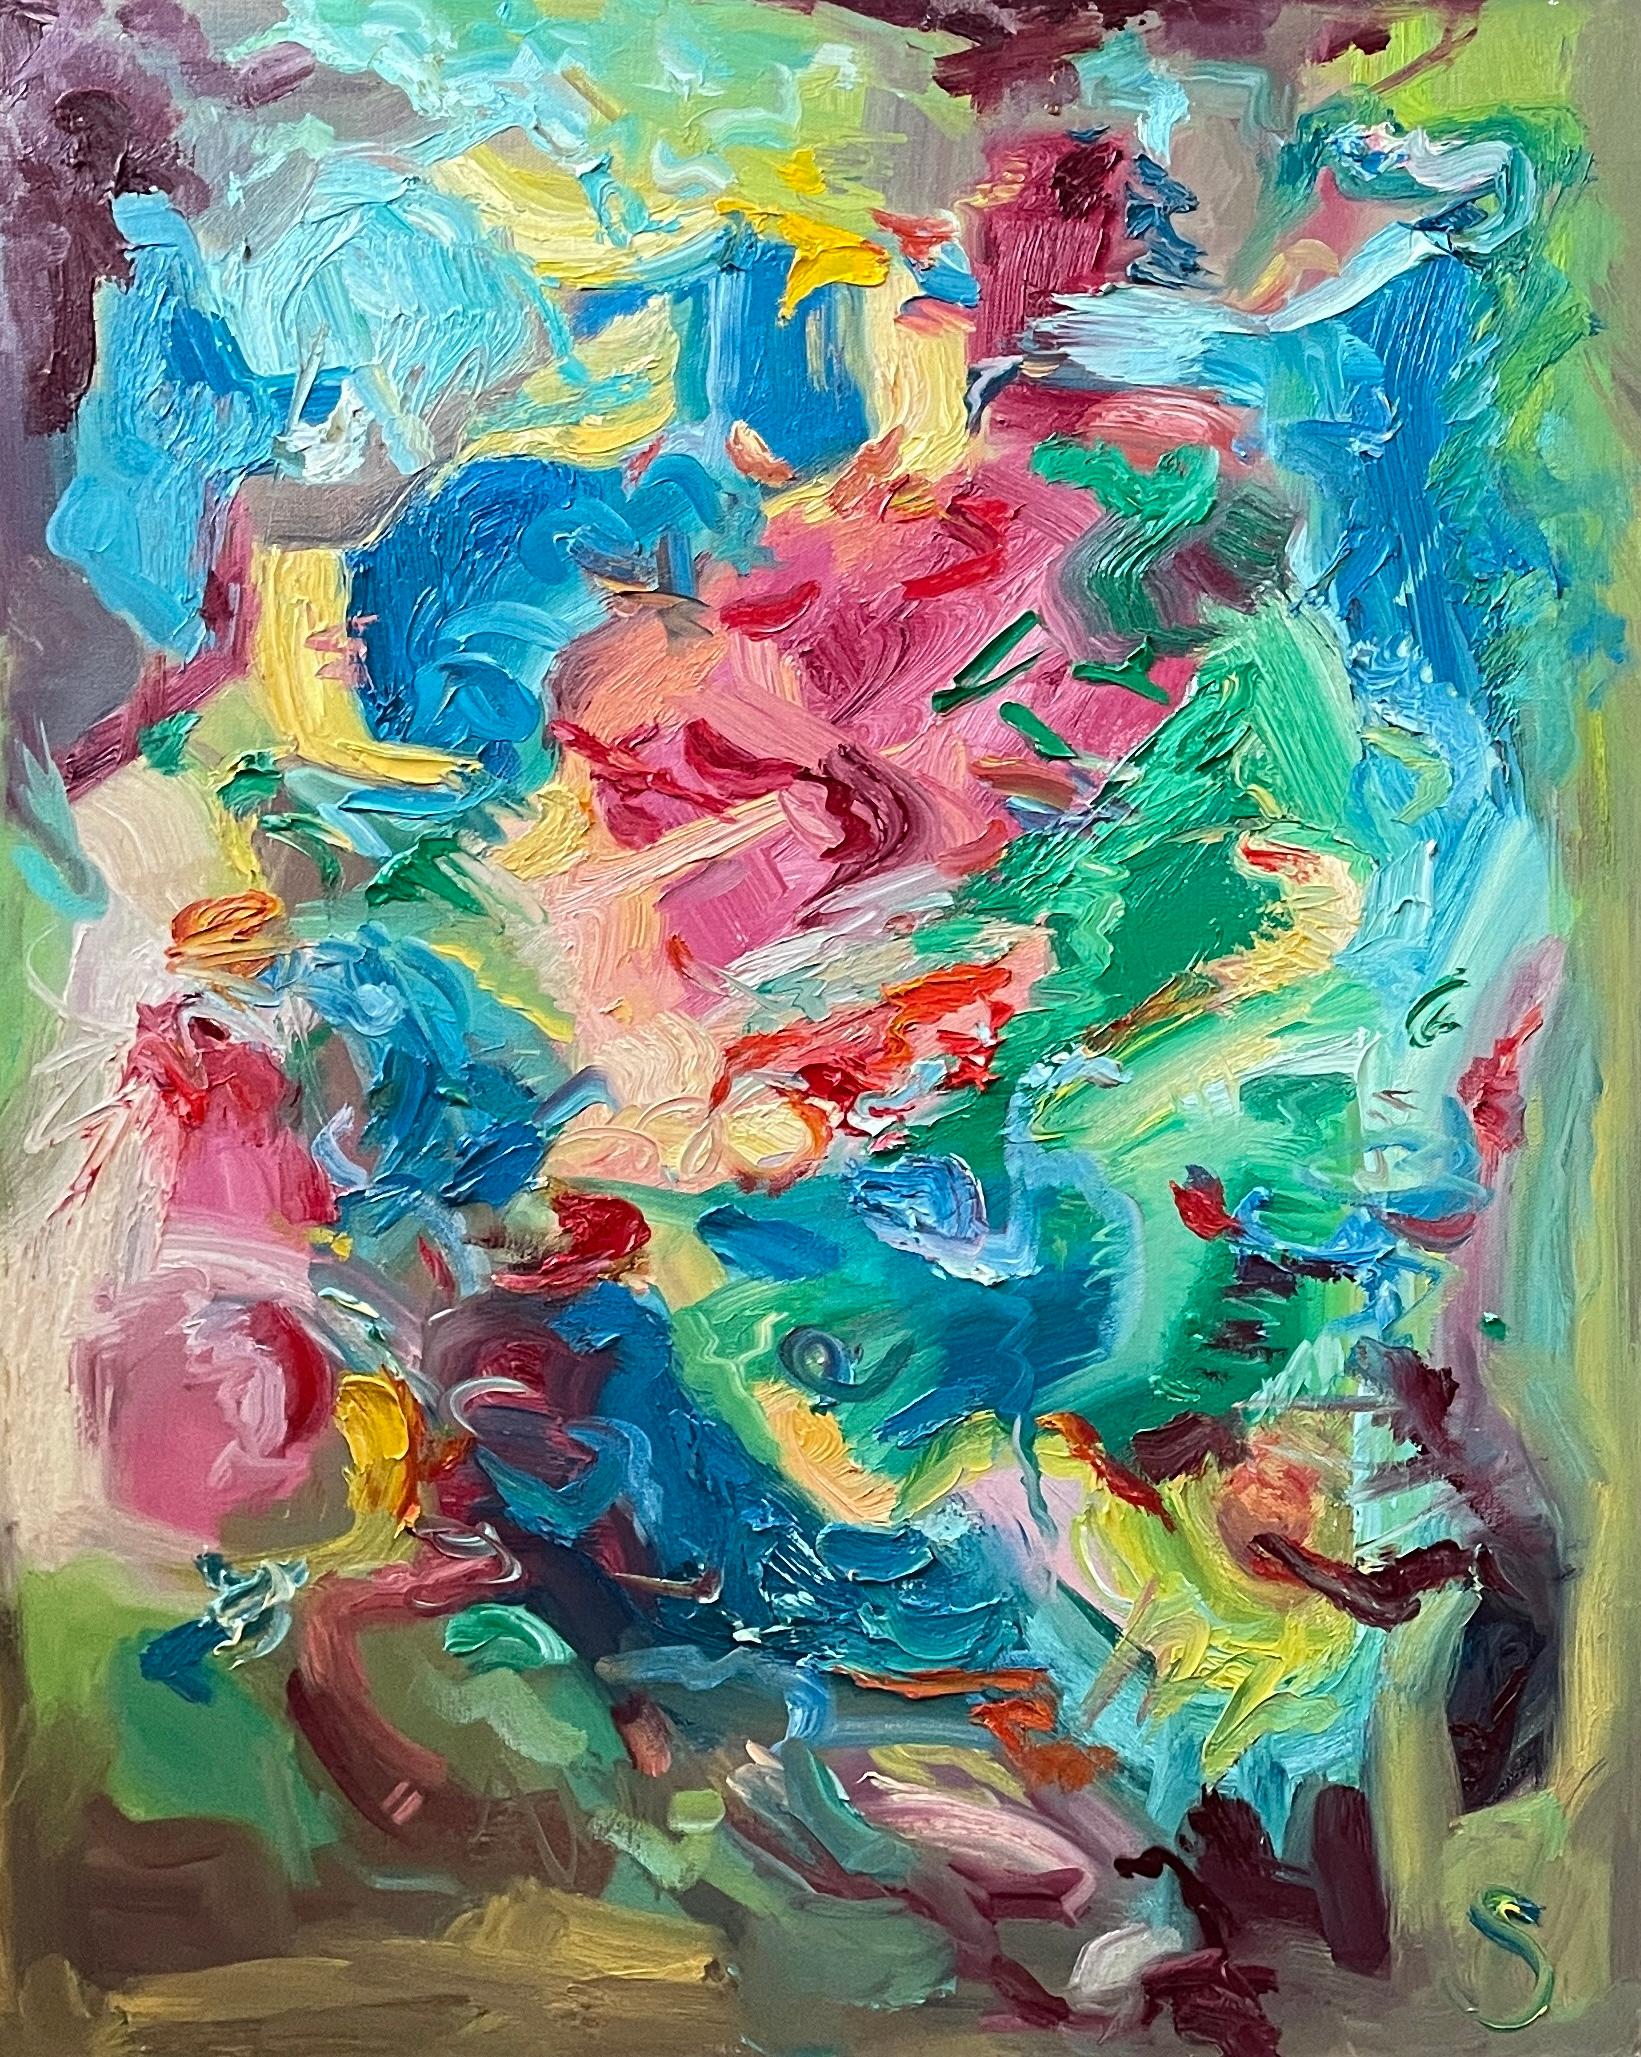 "Joy 2" by Sveta Hessler is a captivating 30" x 24" oil on canvas that stands as a testament to the dance of emotions and the myriad of sensations joy can evoke. A kaleidoscope of colors unfolds across the canvas; deep blues and serene greens swirl